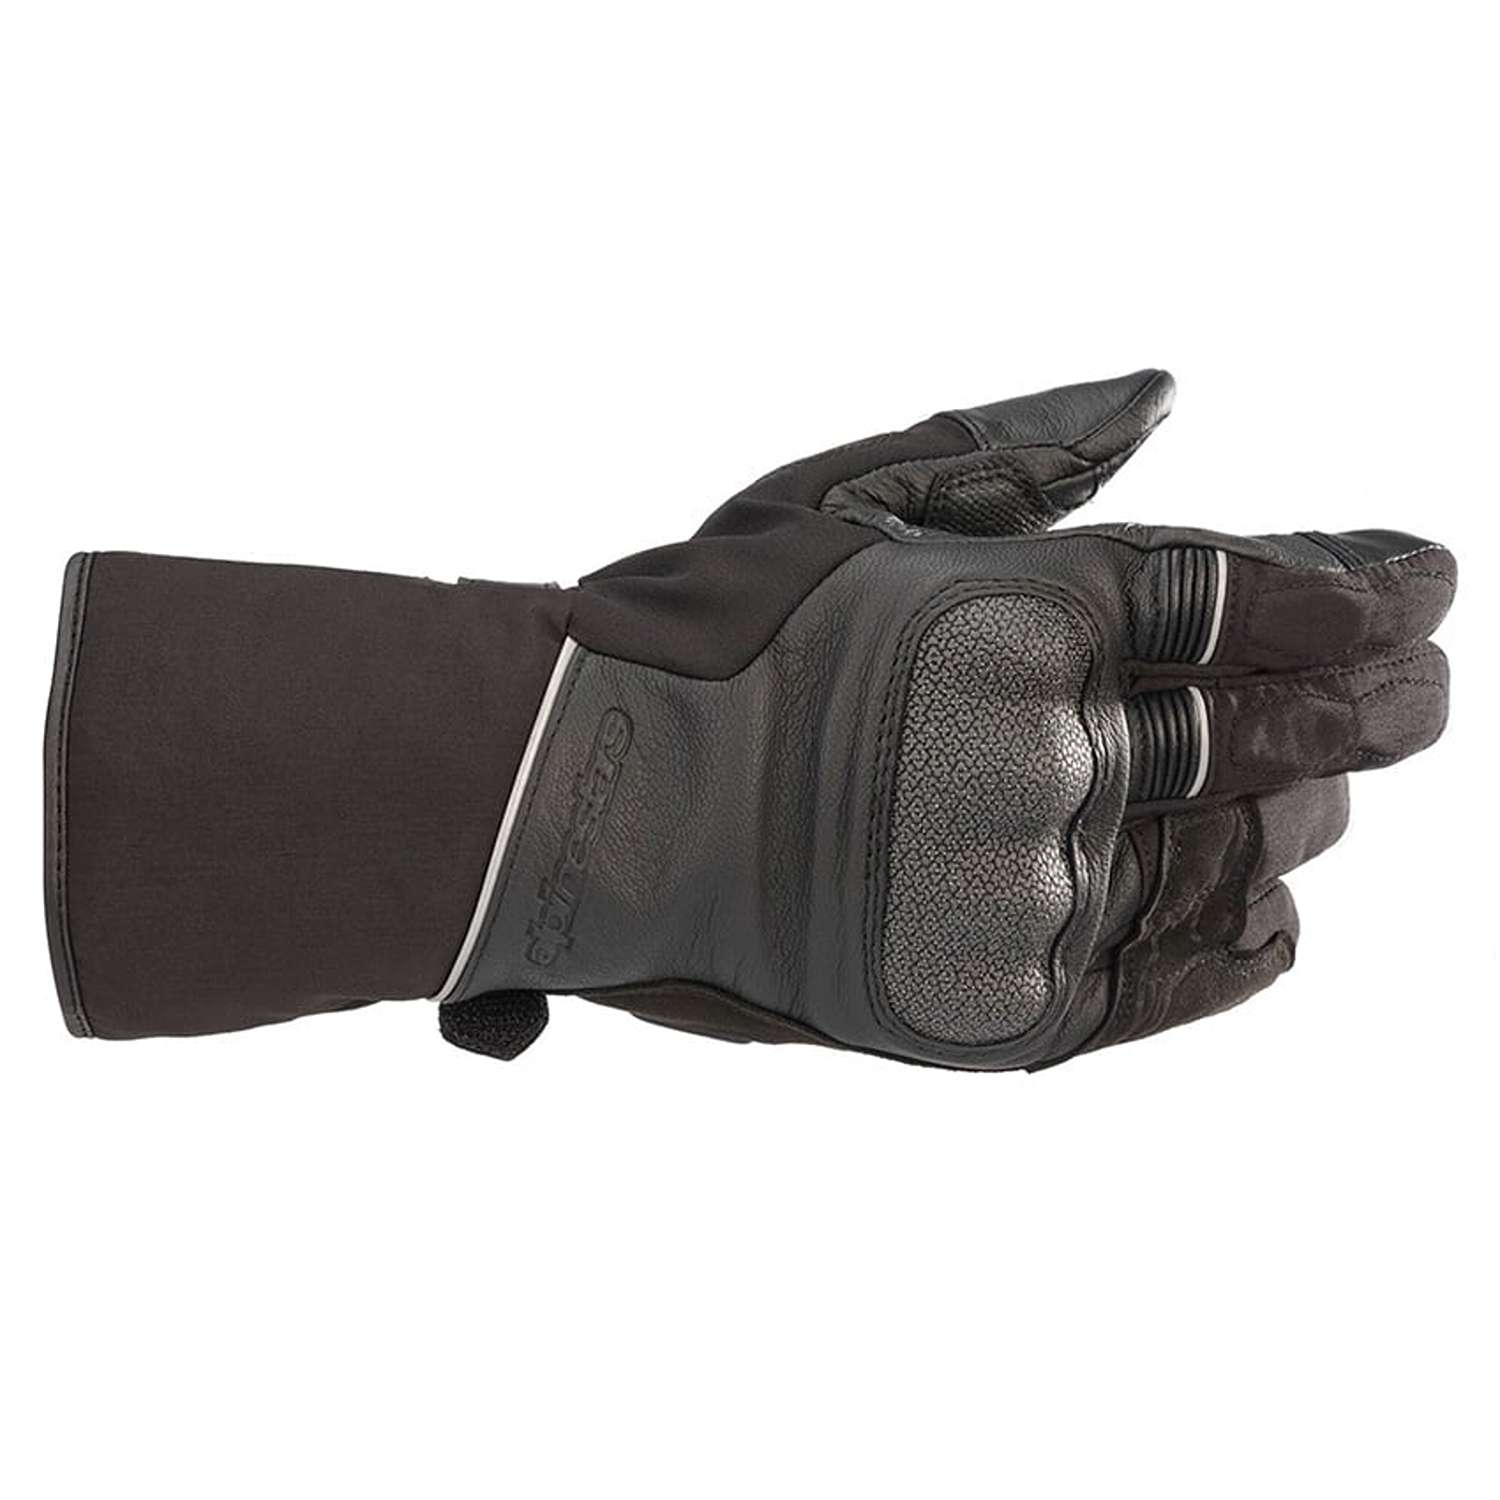 Image of Alpinestars Wr-2 V2 Gore-Tex Gloves With Gore Grip Technology Black Size M ID 8059175098536